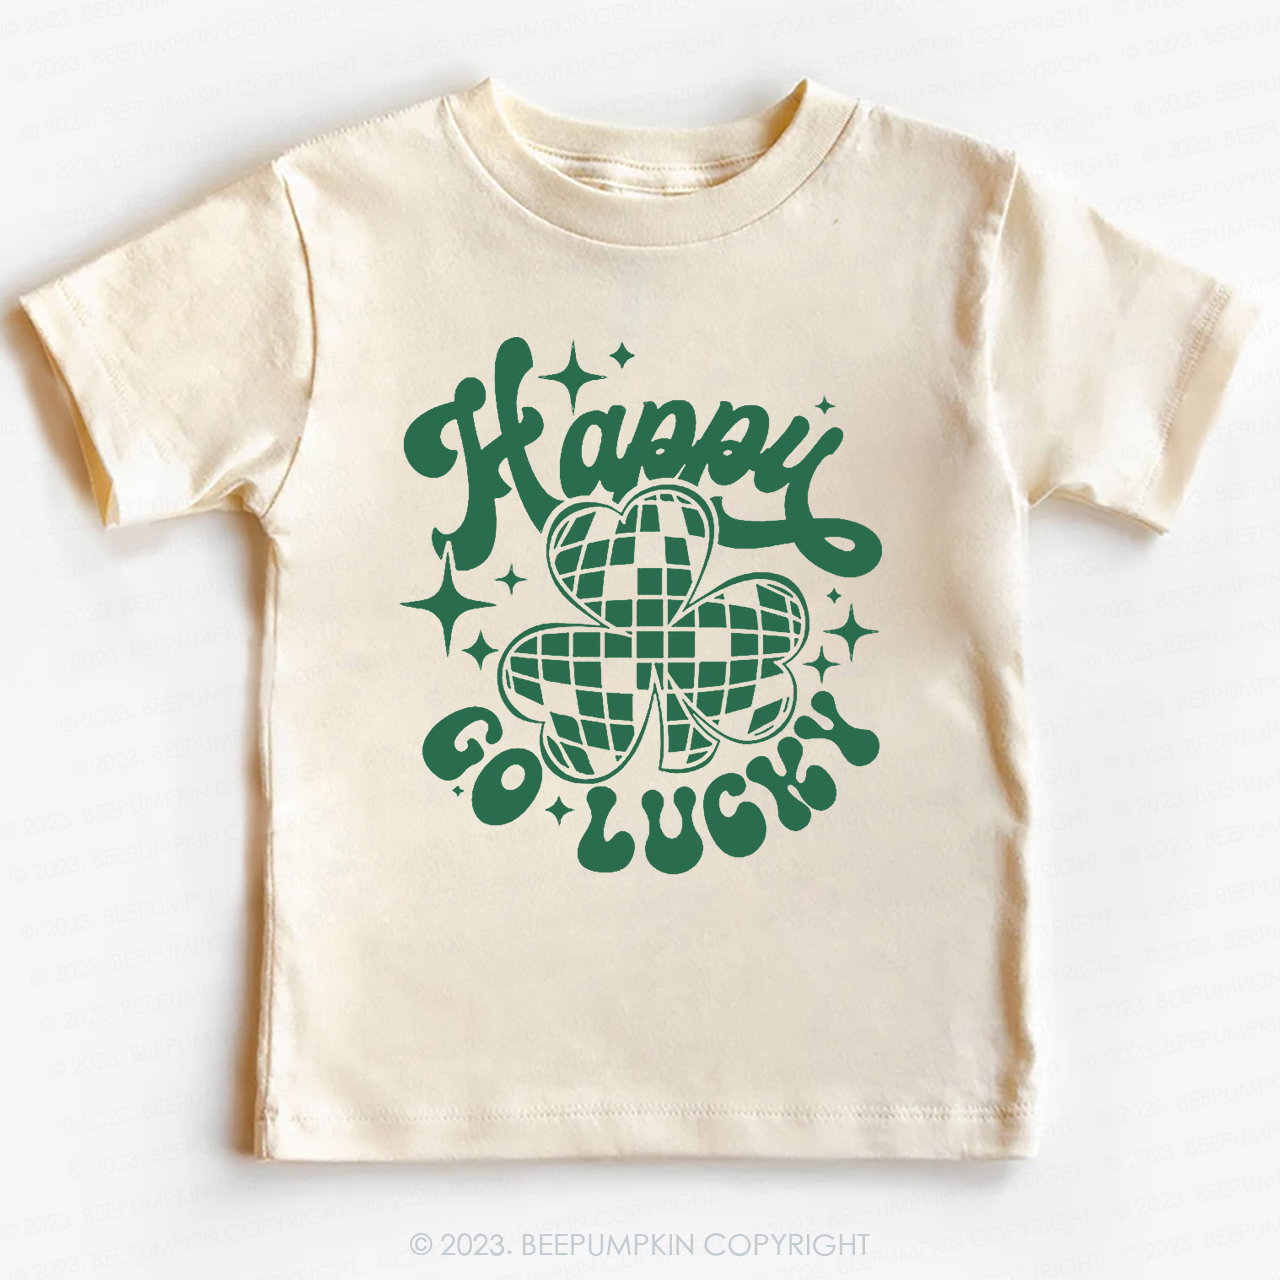 Happy Go Lucky St.Patricks Day -Toddler Tees